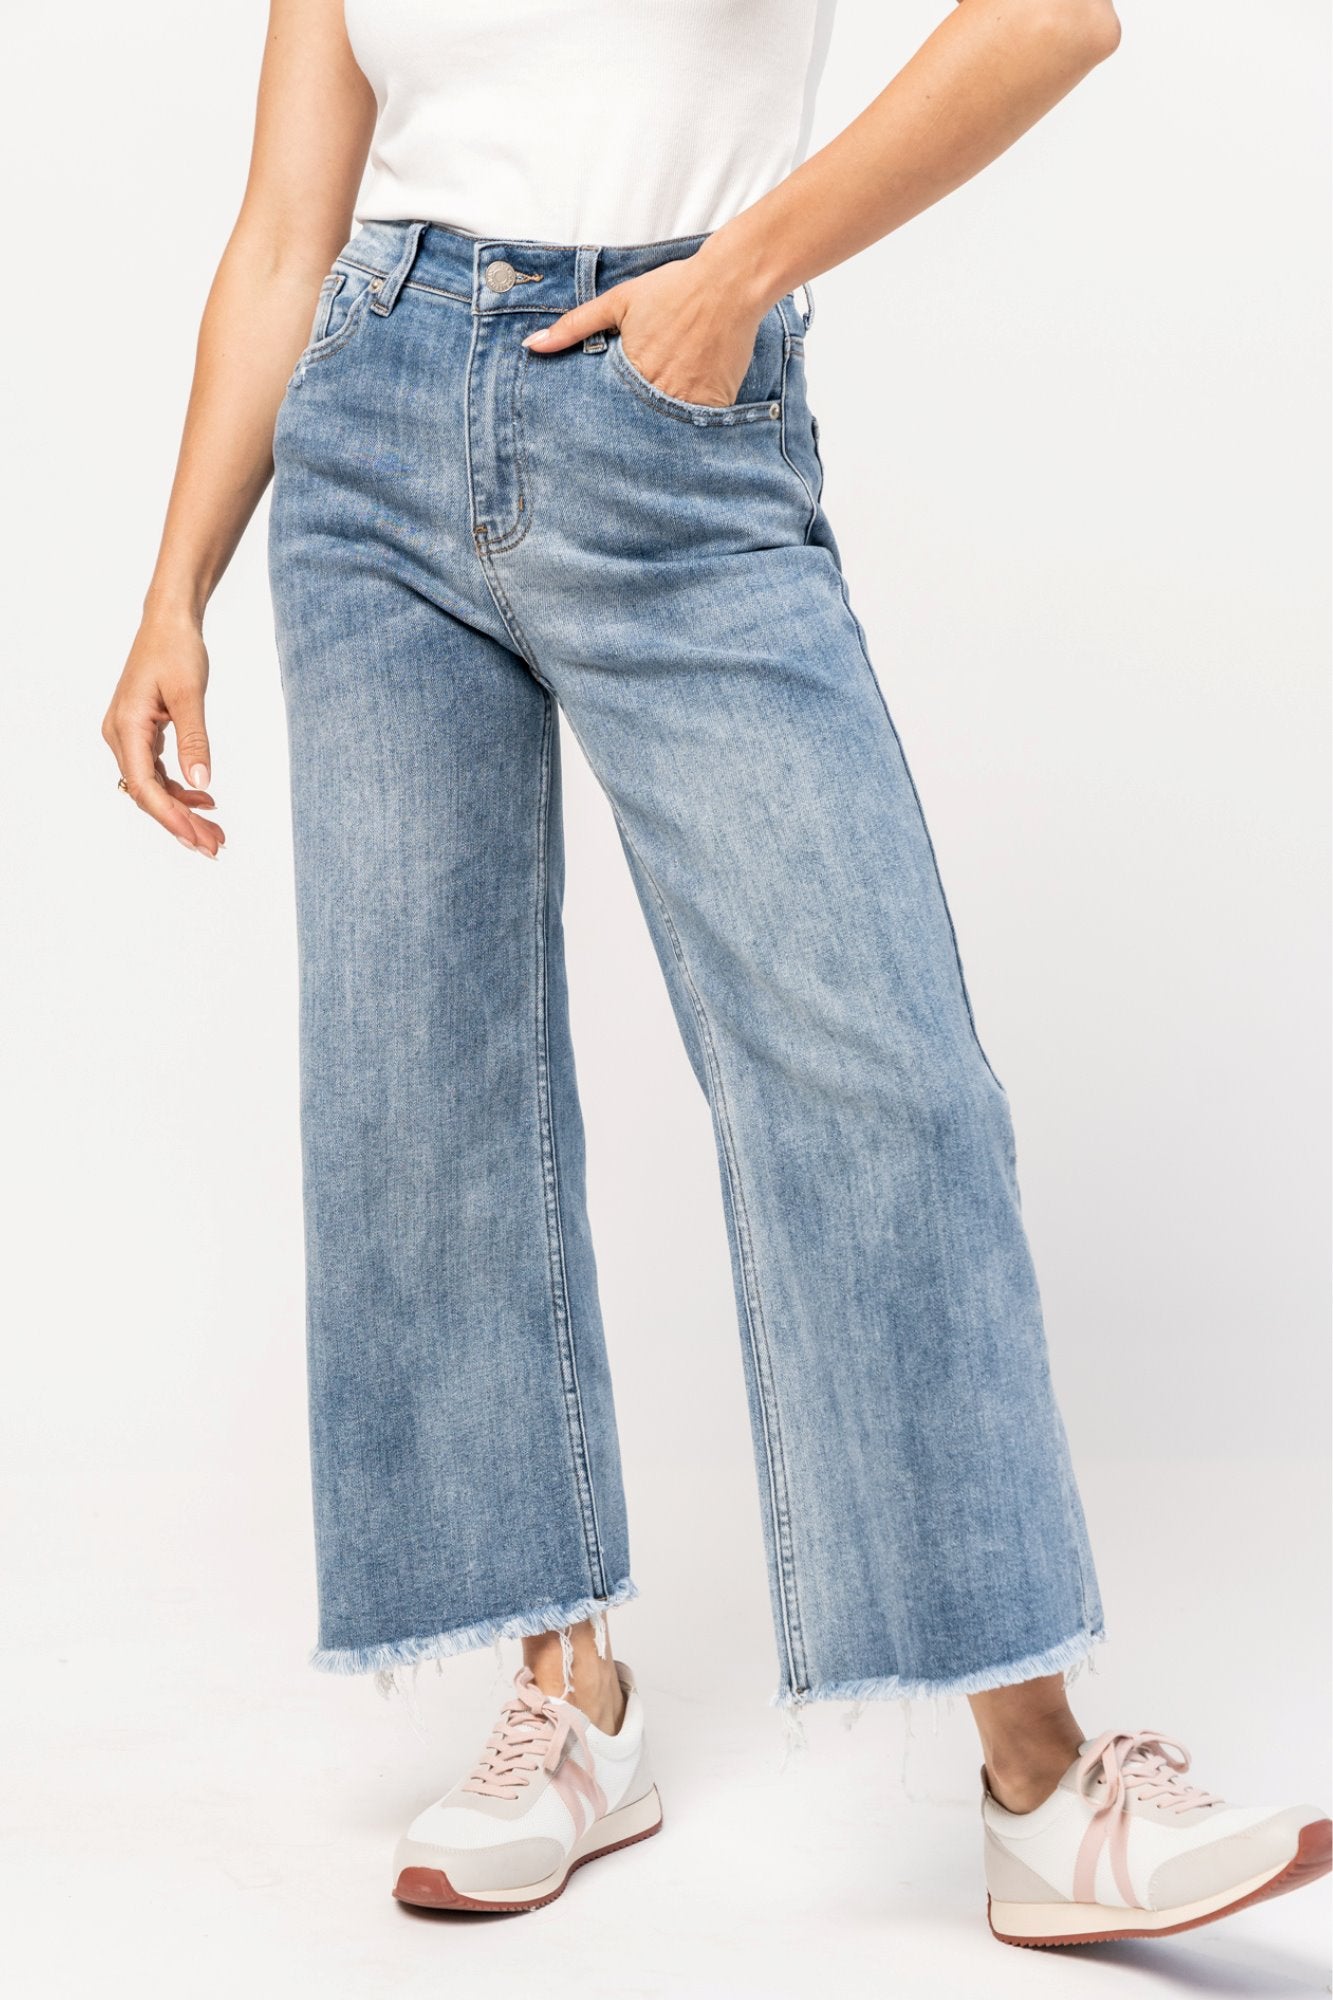 Griffin Jeans - Wide Leg, High Rise